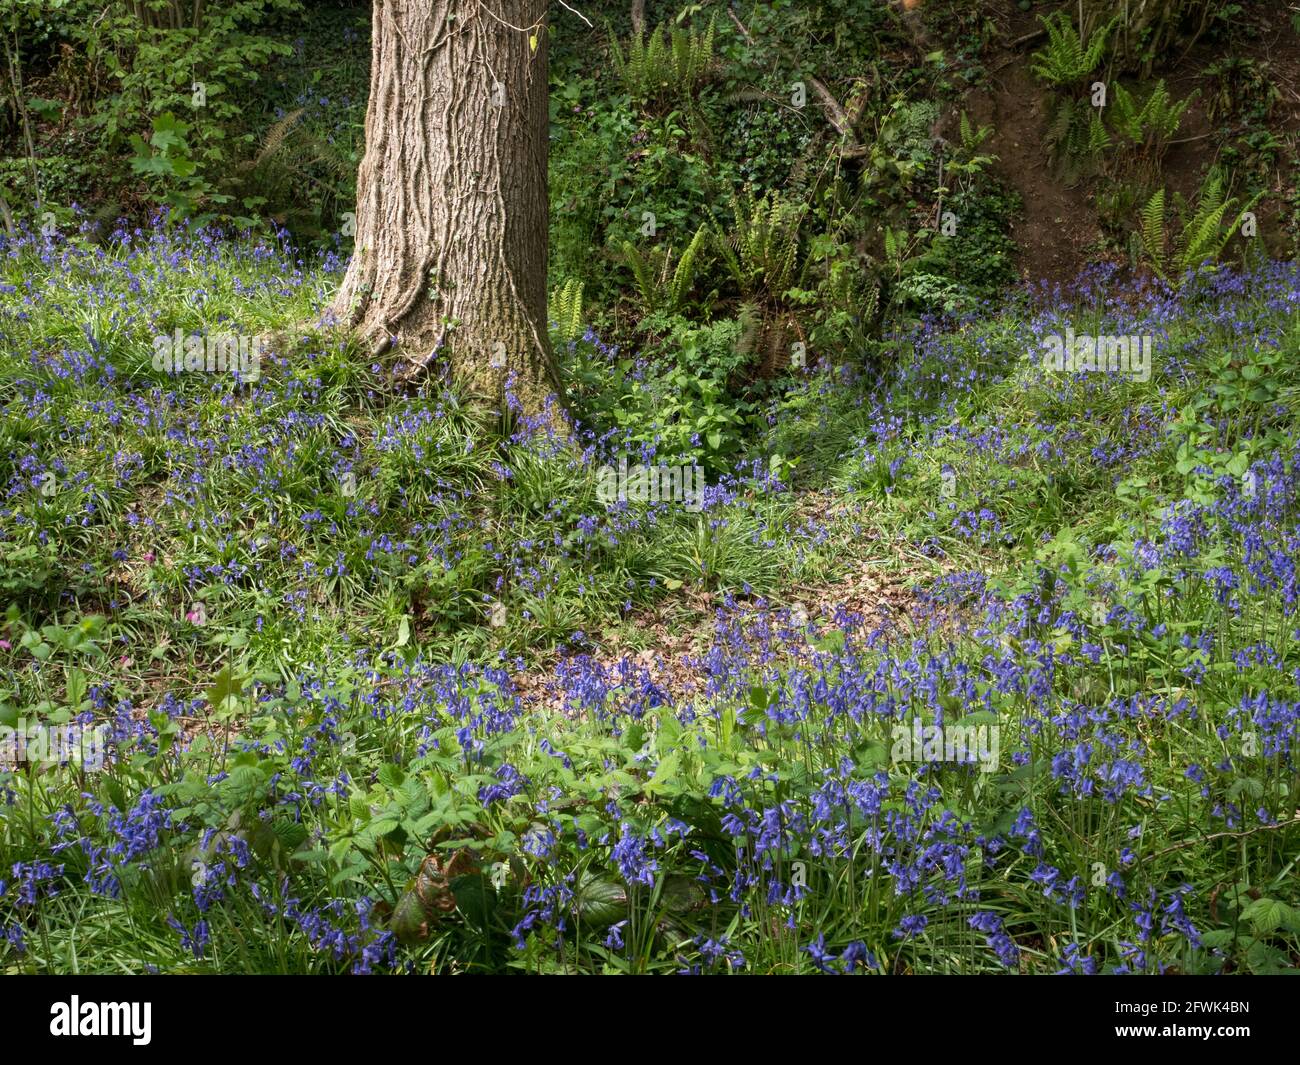 English Bluebells at foot of a veiny tree with ivy climbing up in dappled sun light with curved winding path track Stock Photo